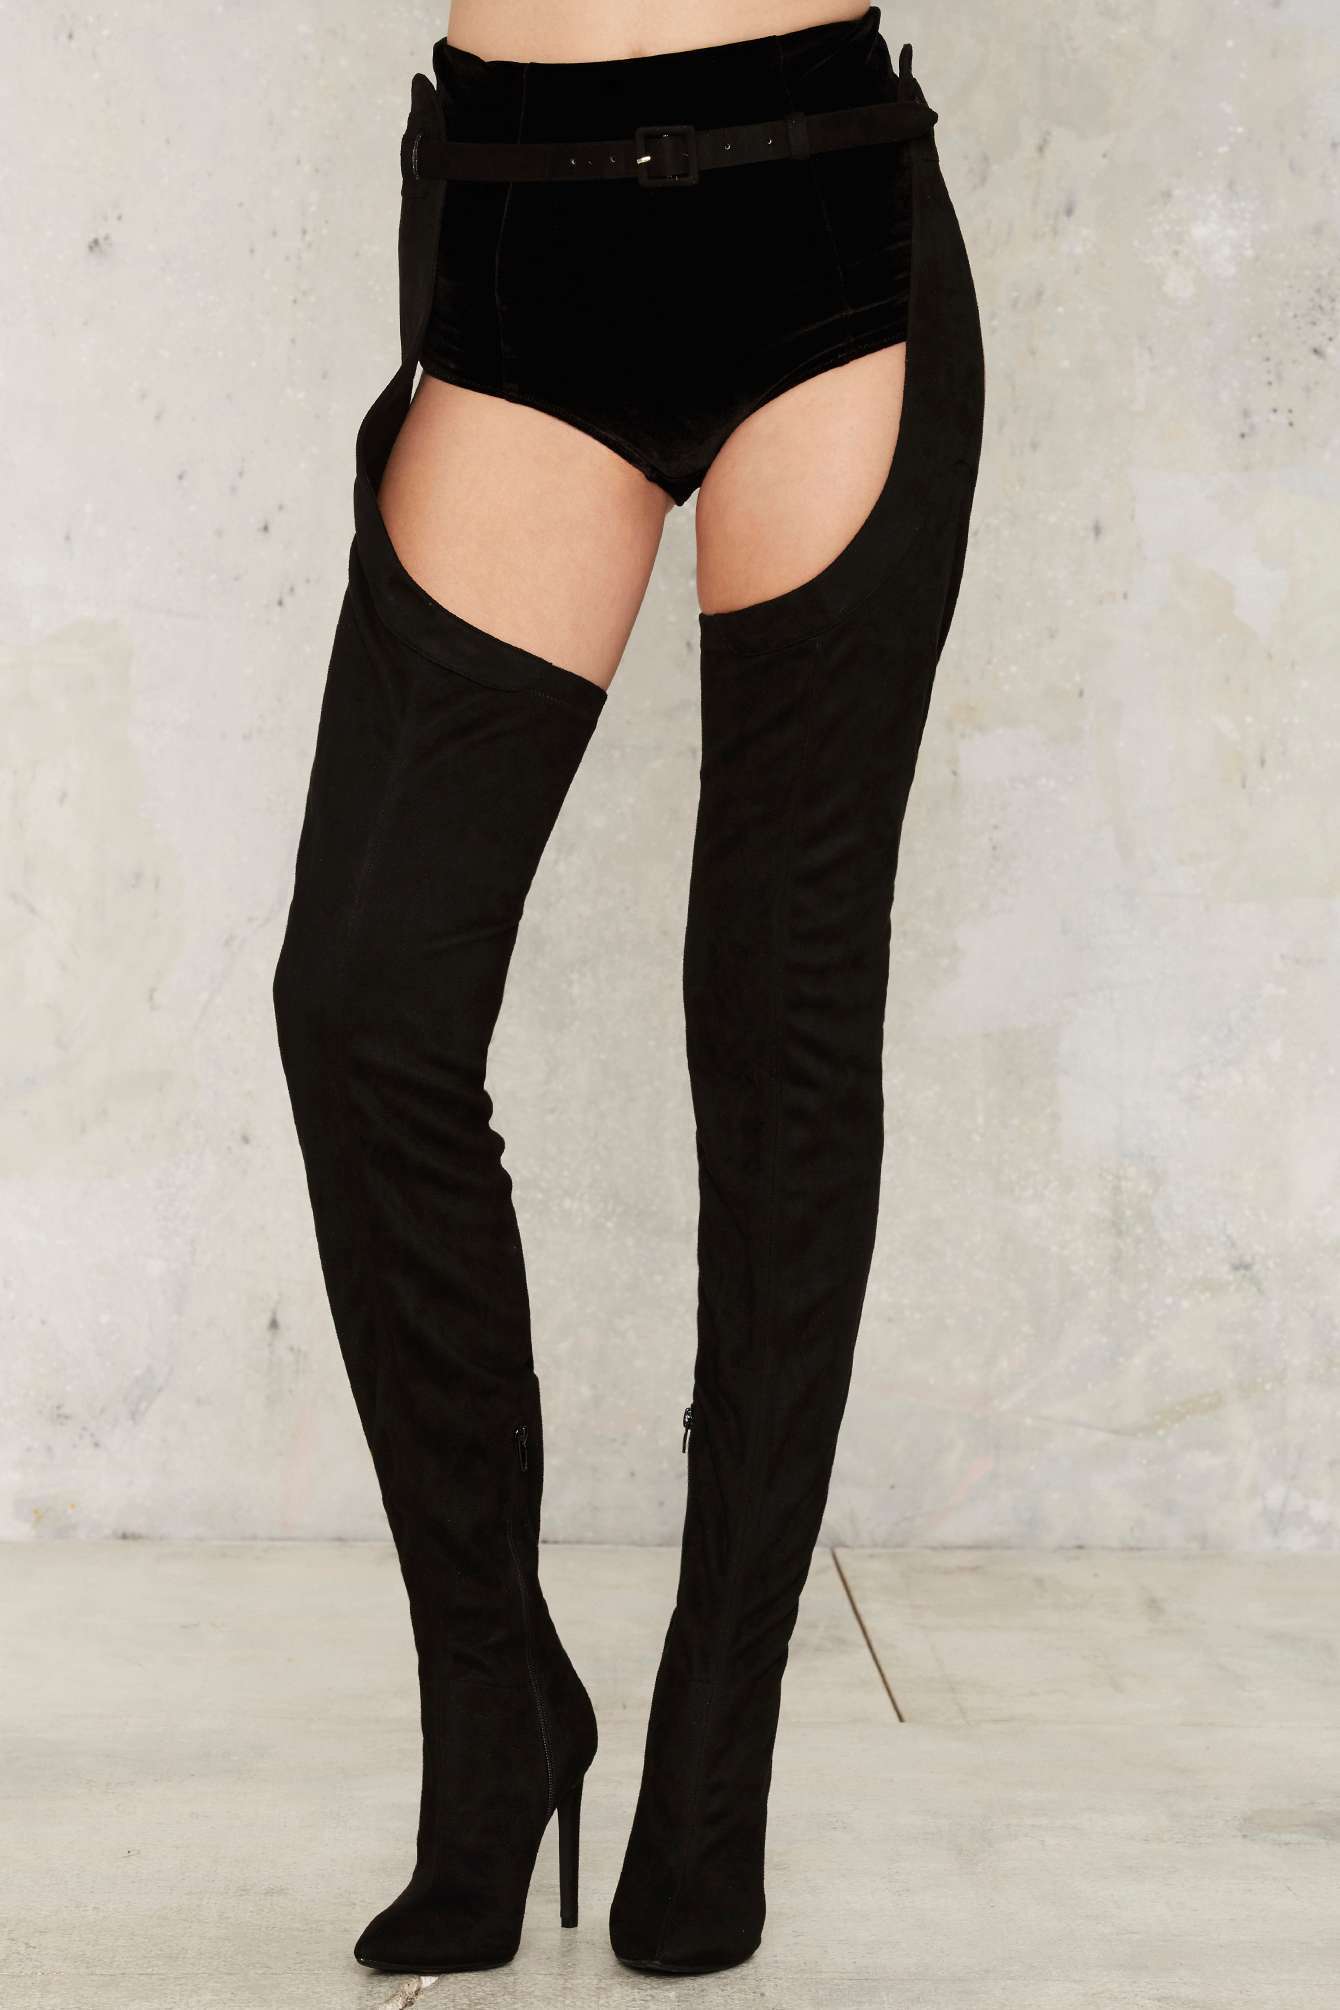 thigh high boots with belt attached